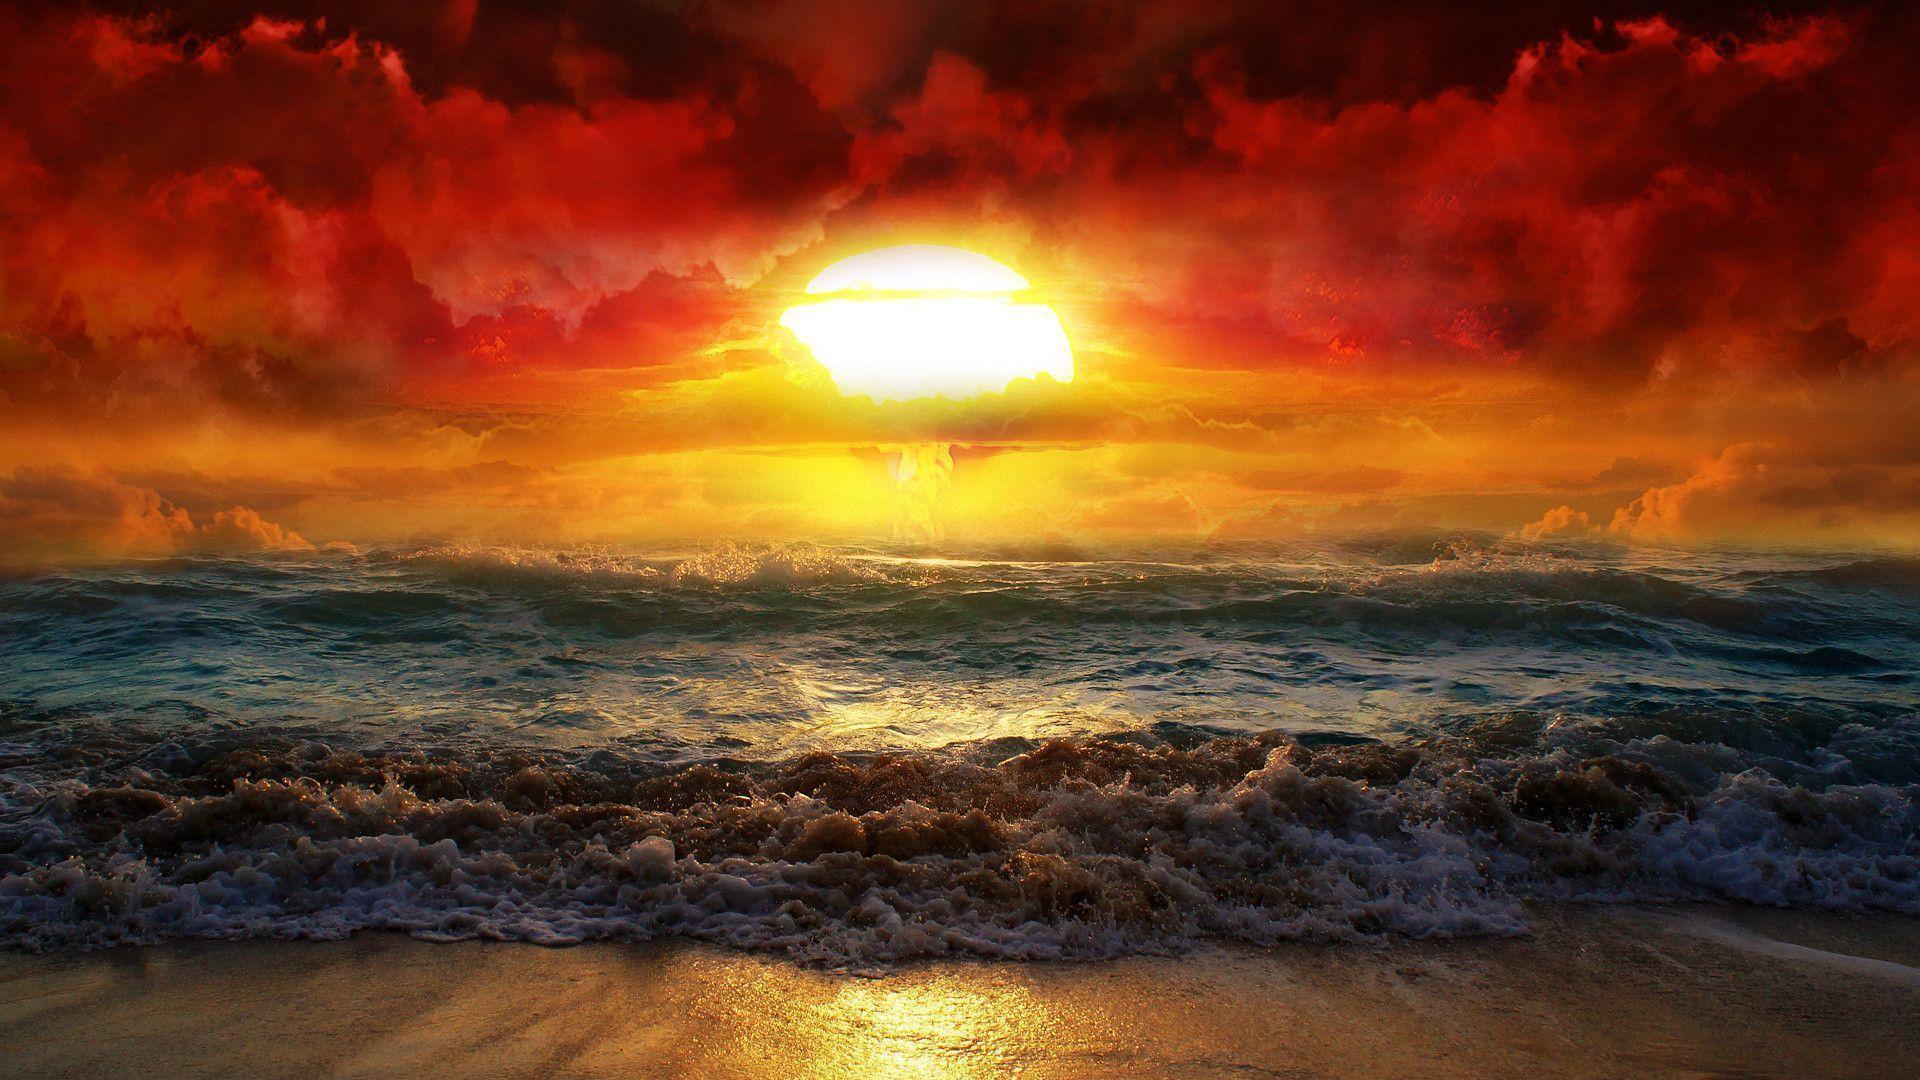 Download wallpaper A nuclear explosion, sea вЂ‹вЂ‹froth, turbulent